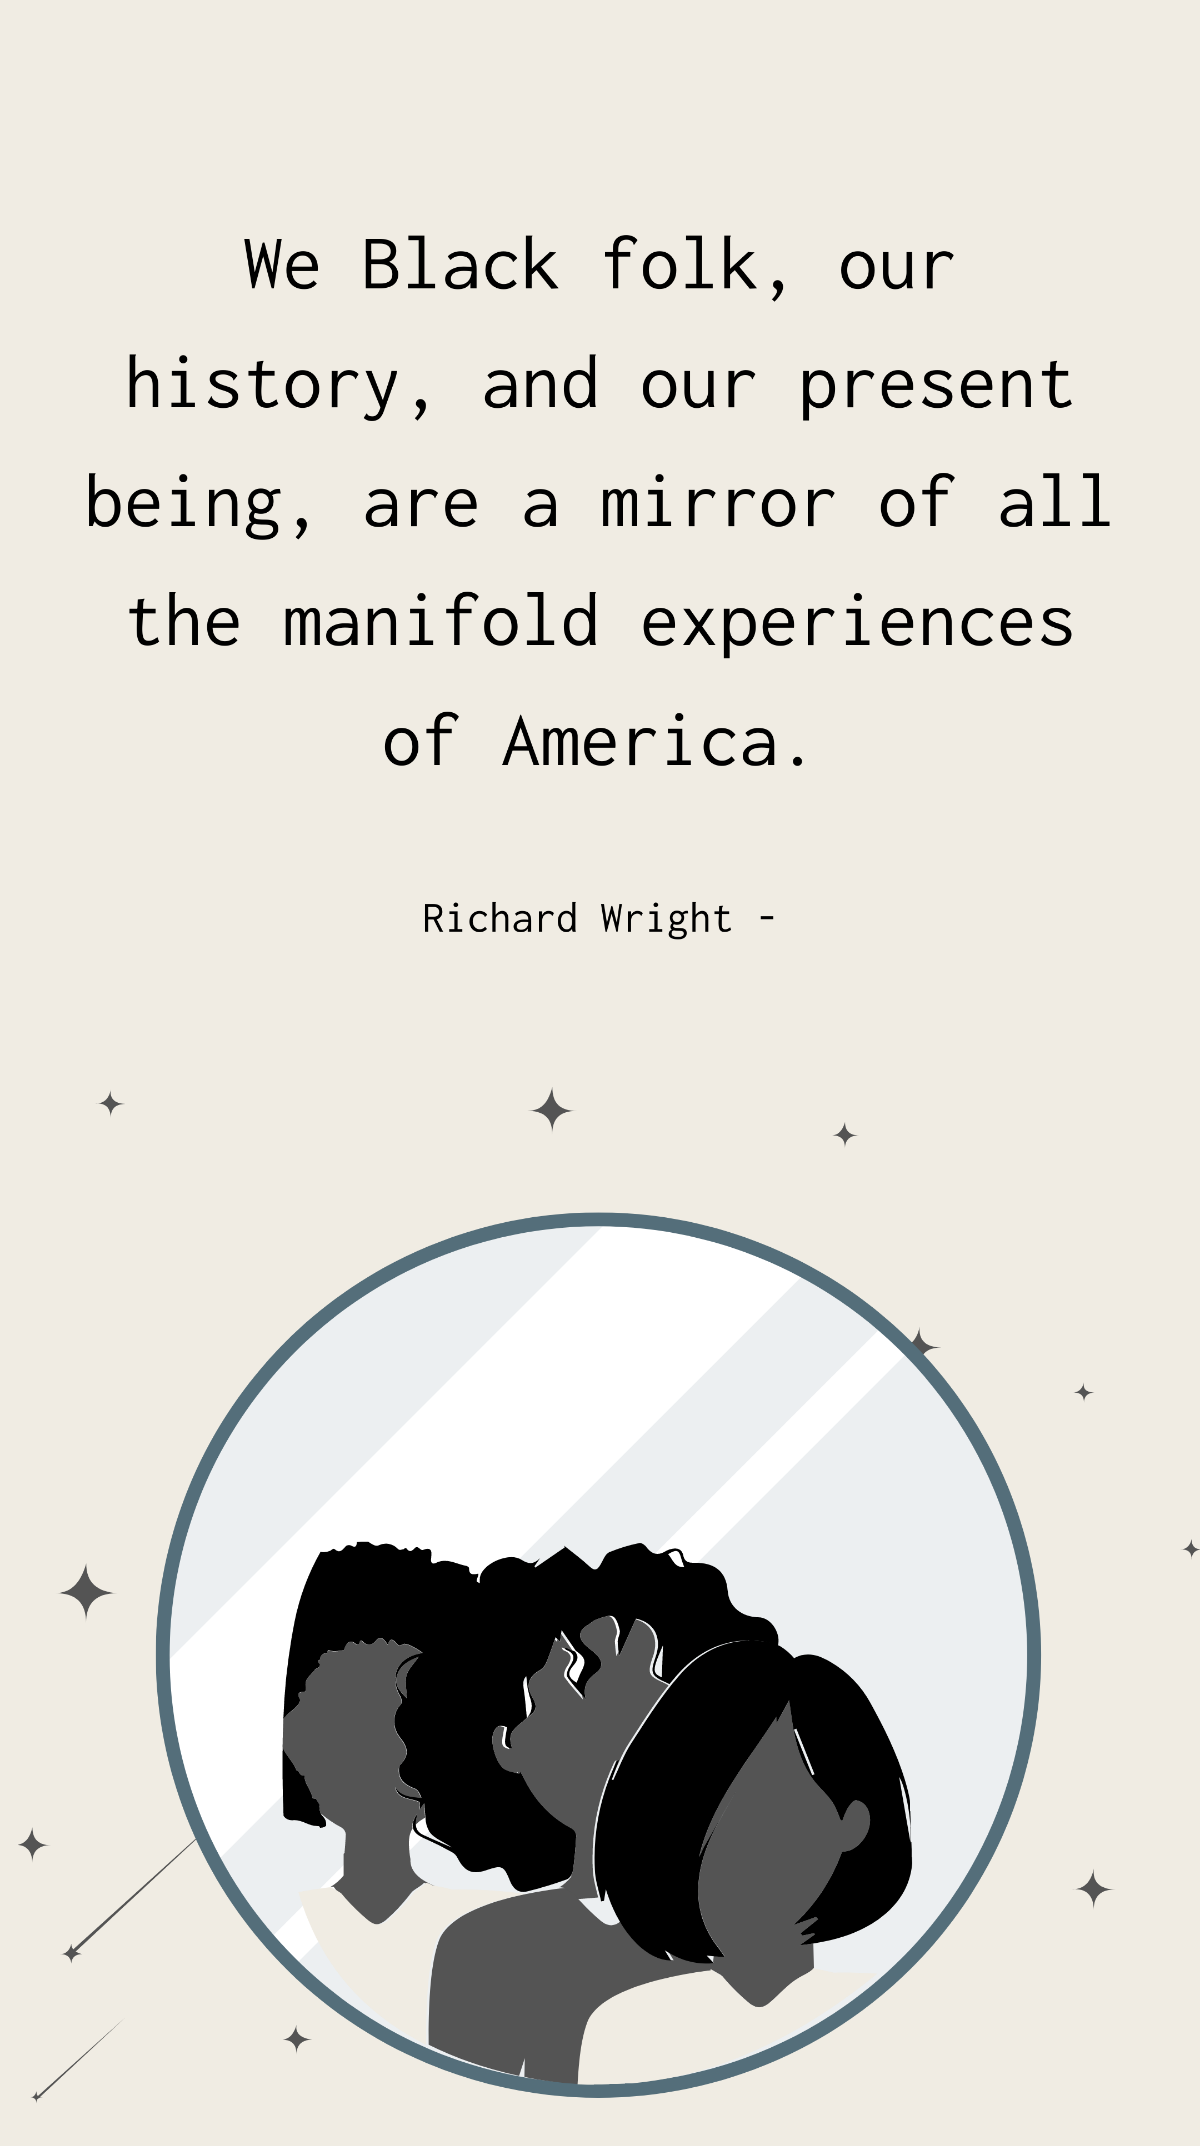 Richard Wright - We Black folk, our history, and our present being, are a mirror of all the manifold experiences of America. Template